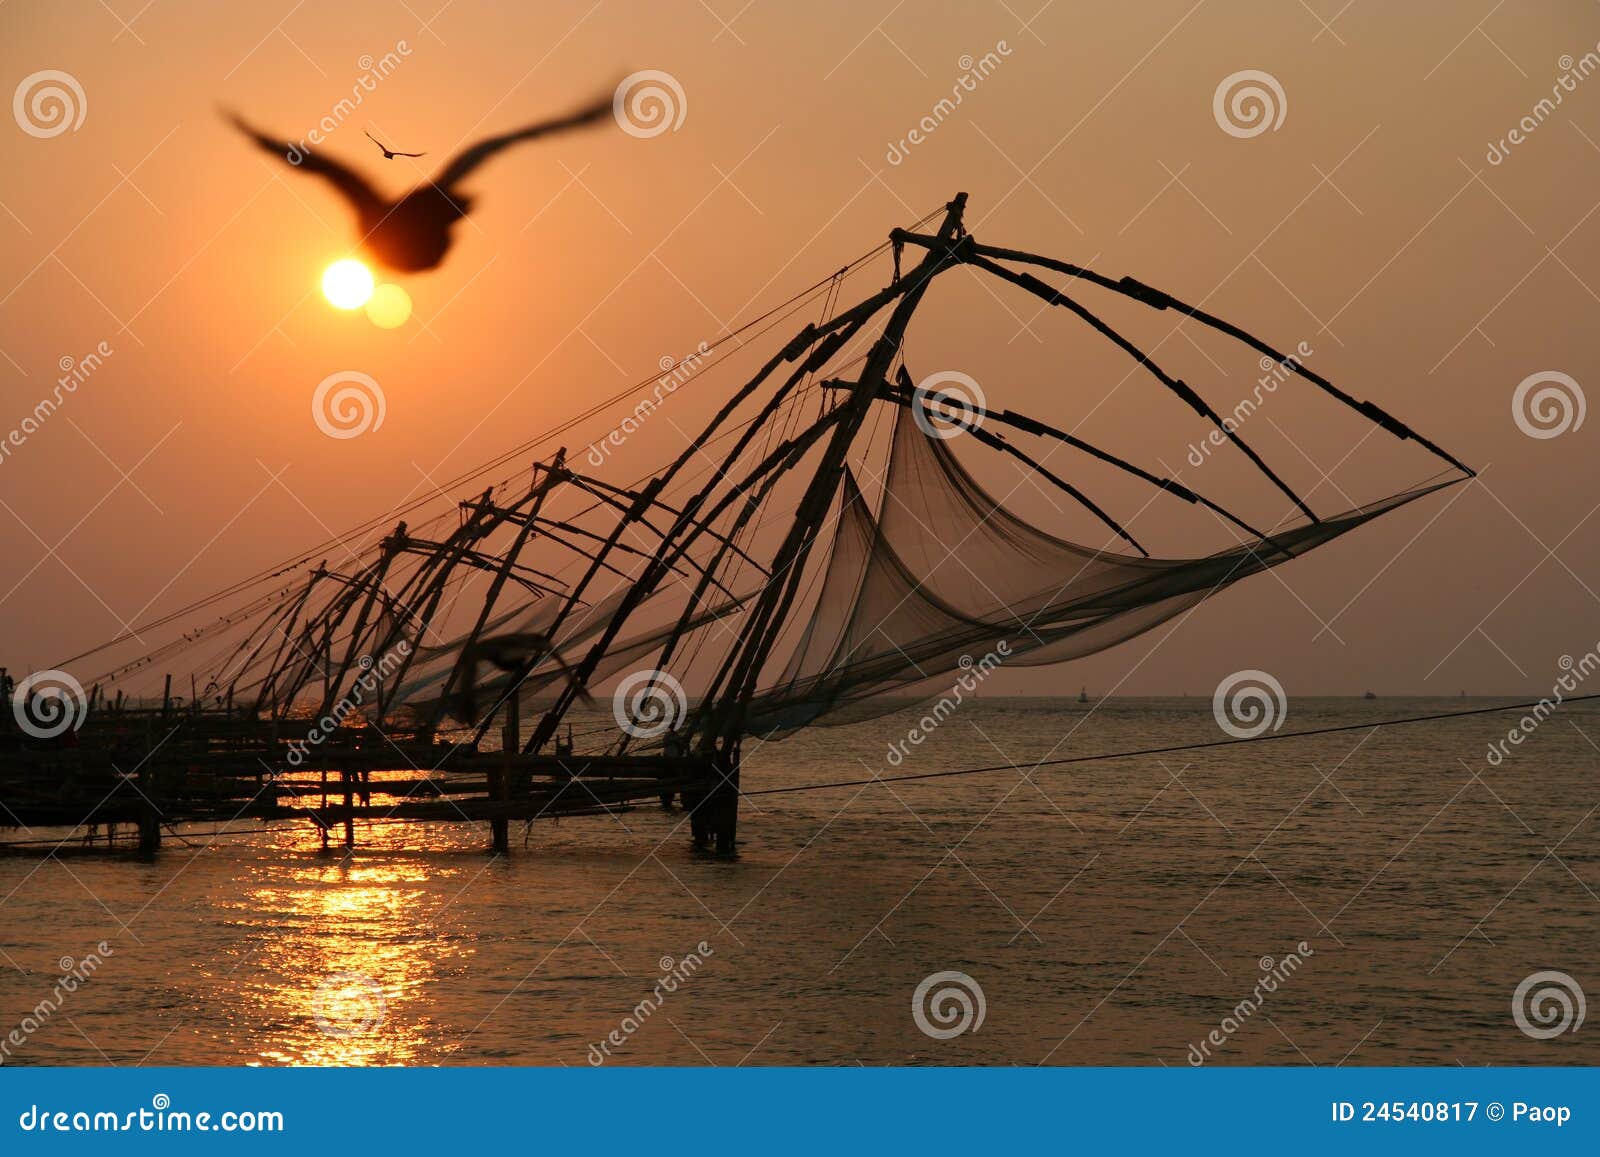 1,043 Colorful Fishing Nets Ocean Background Stock Photos - Free